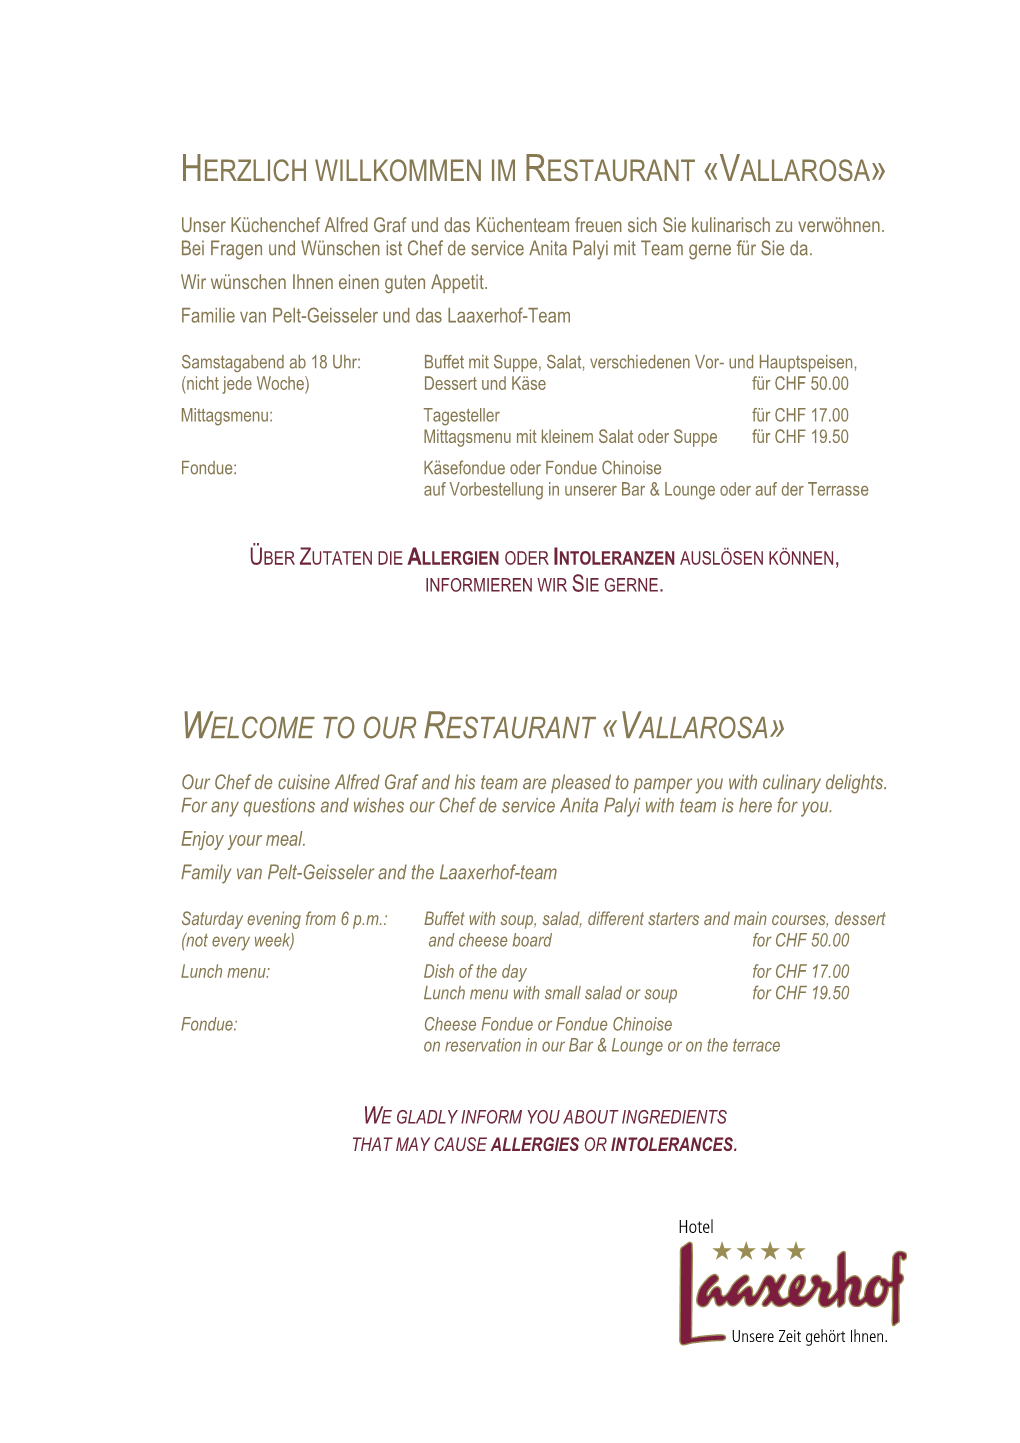 Welcome to Our Restaurant «Vallarosa»